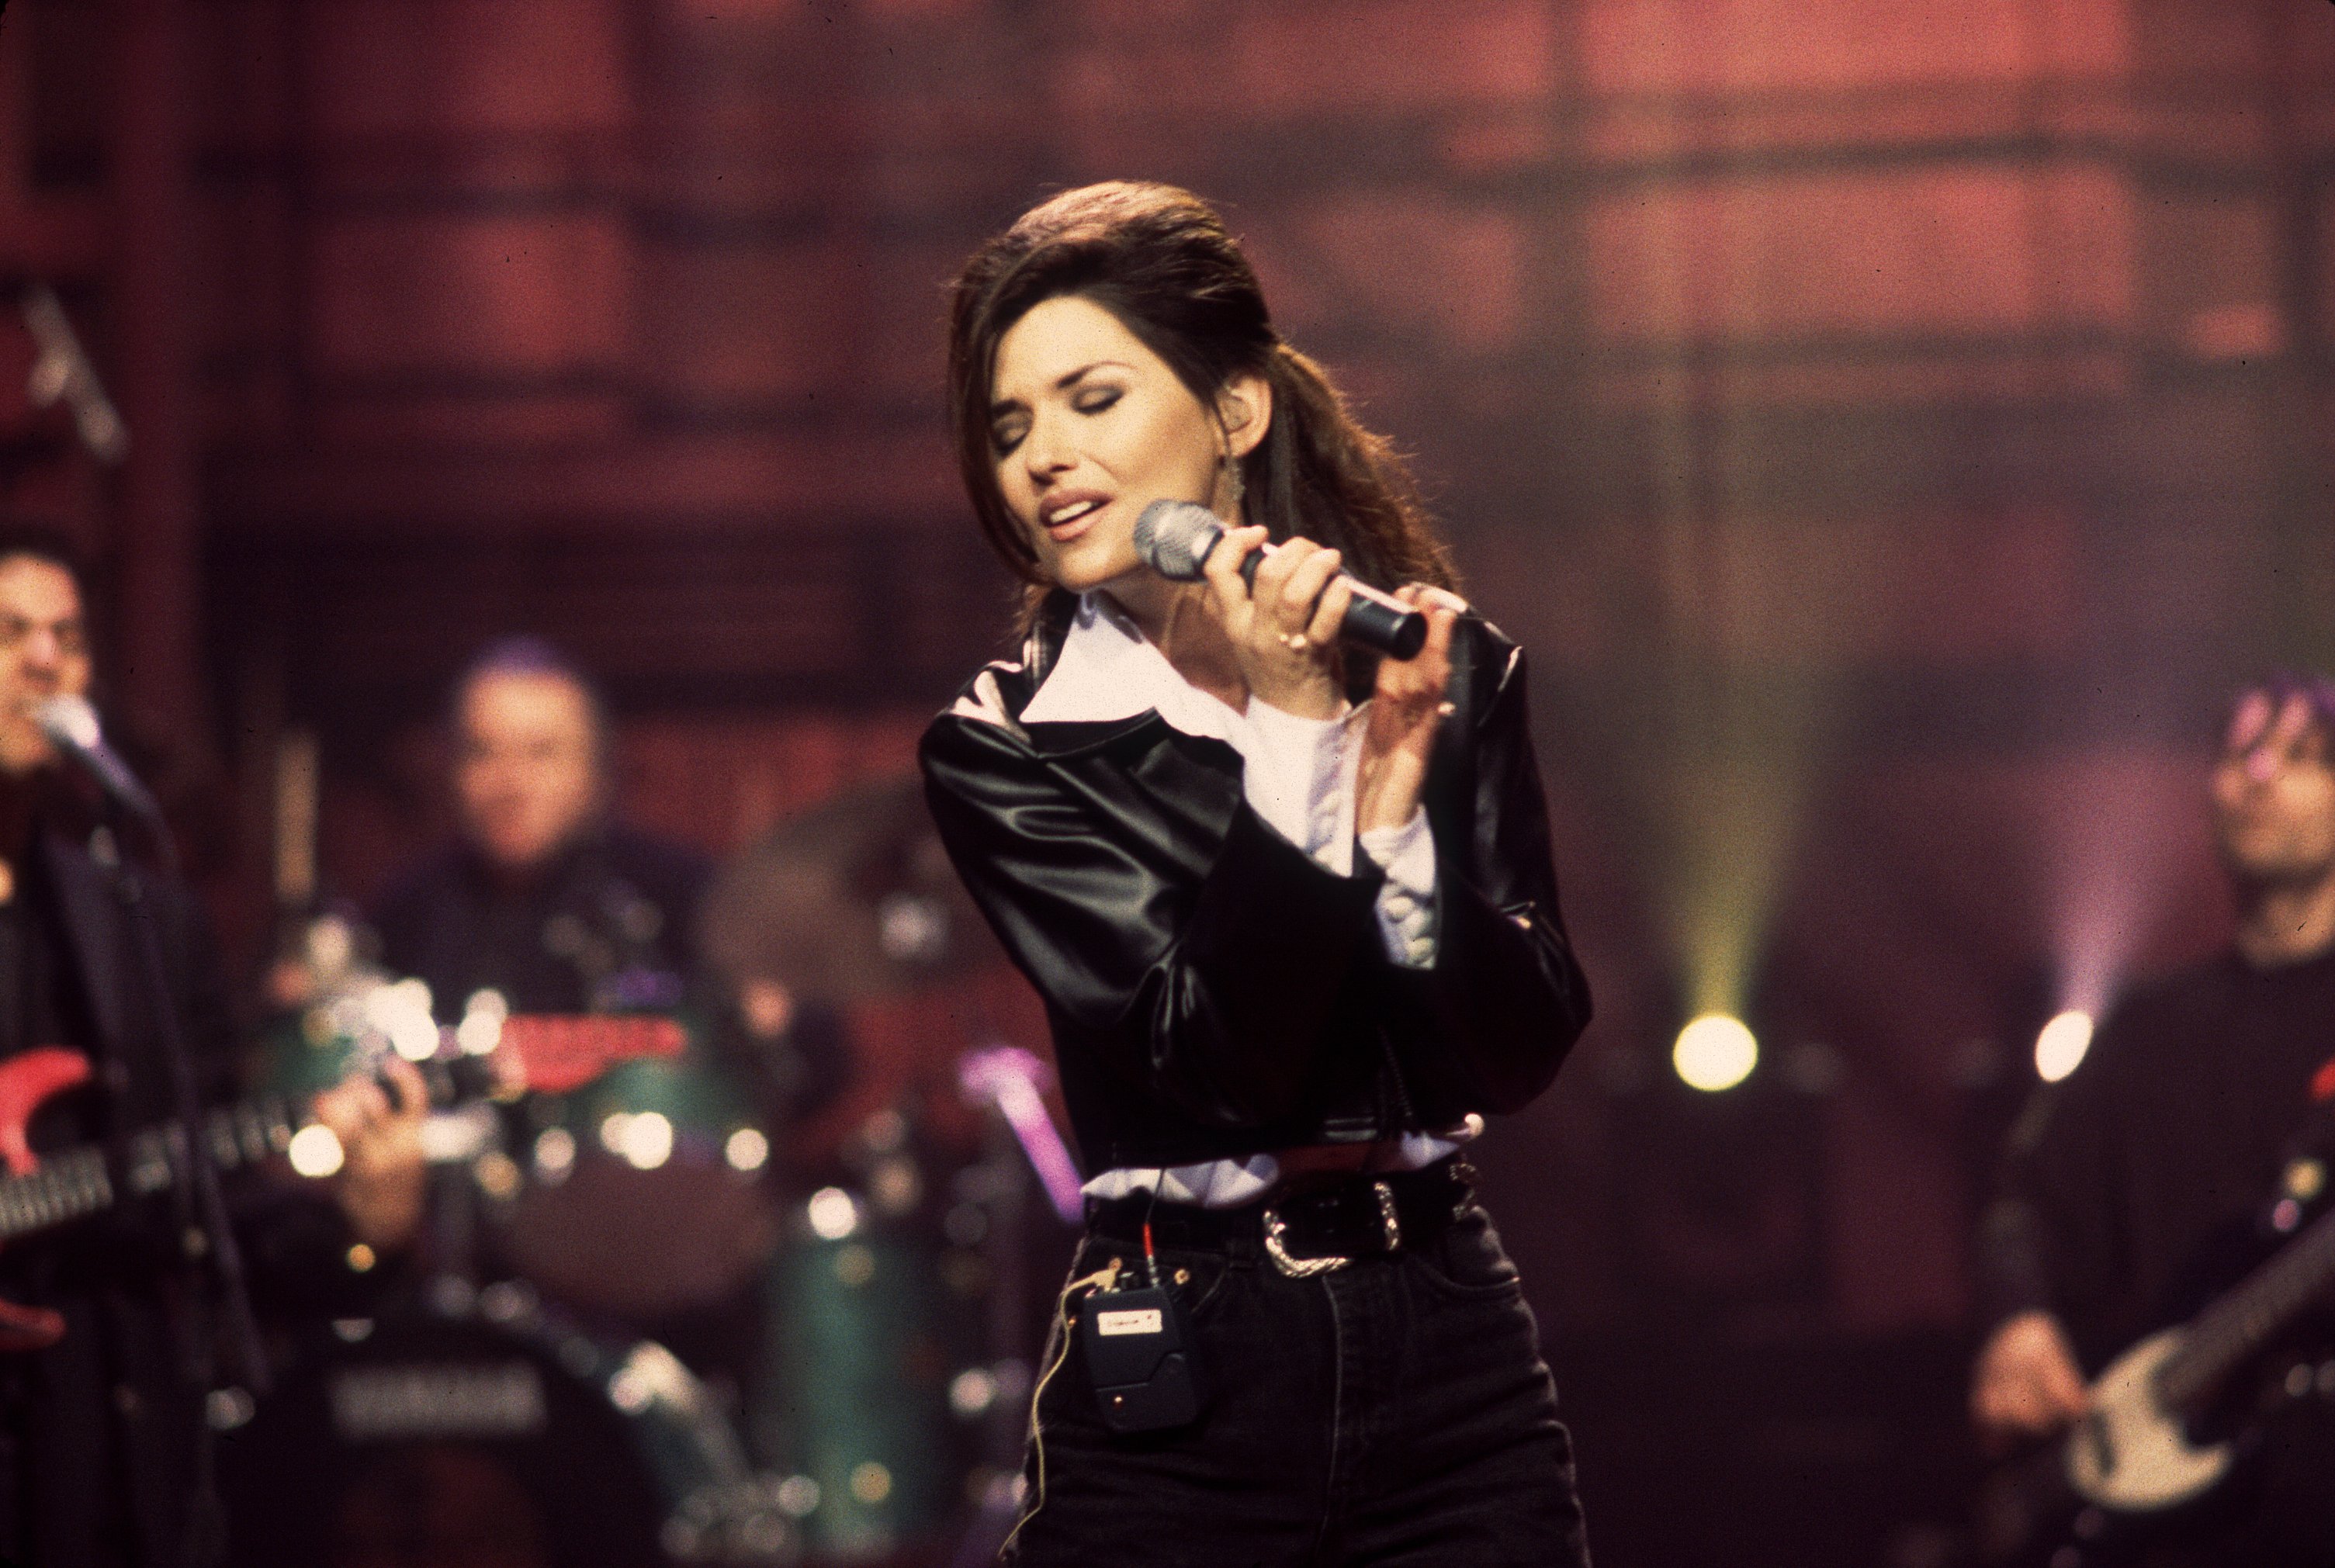 Shania Twain performing a soundcheck for "The David Letterman Show" in New York, 1996 | Source: Getty Images 